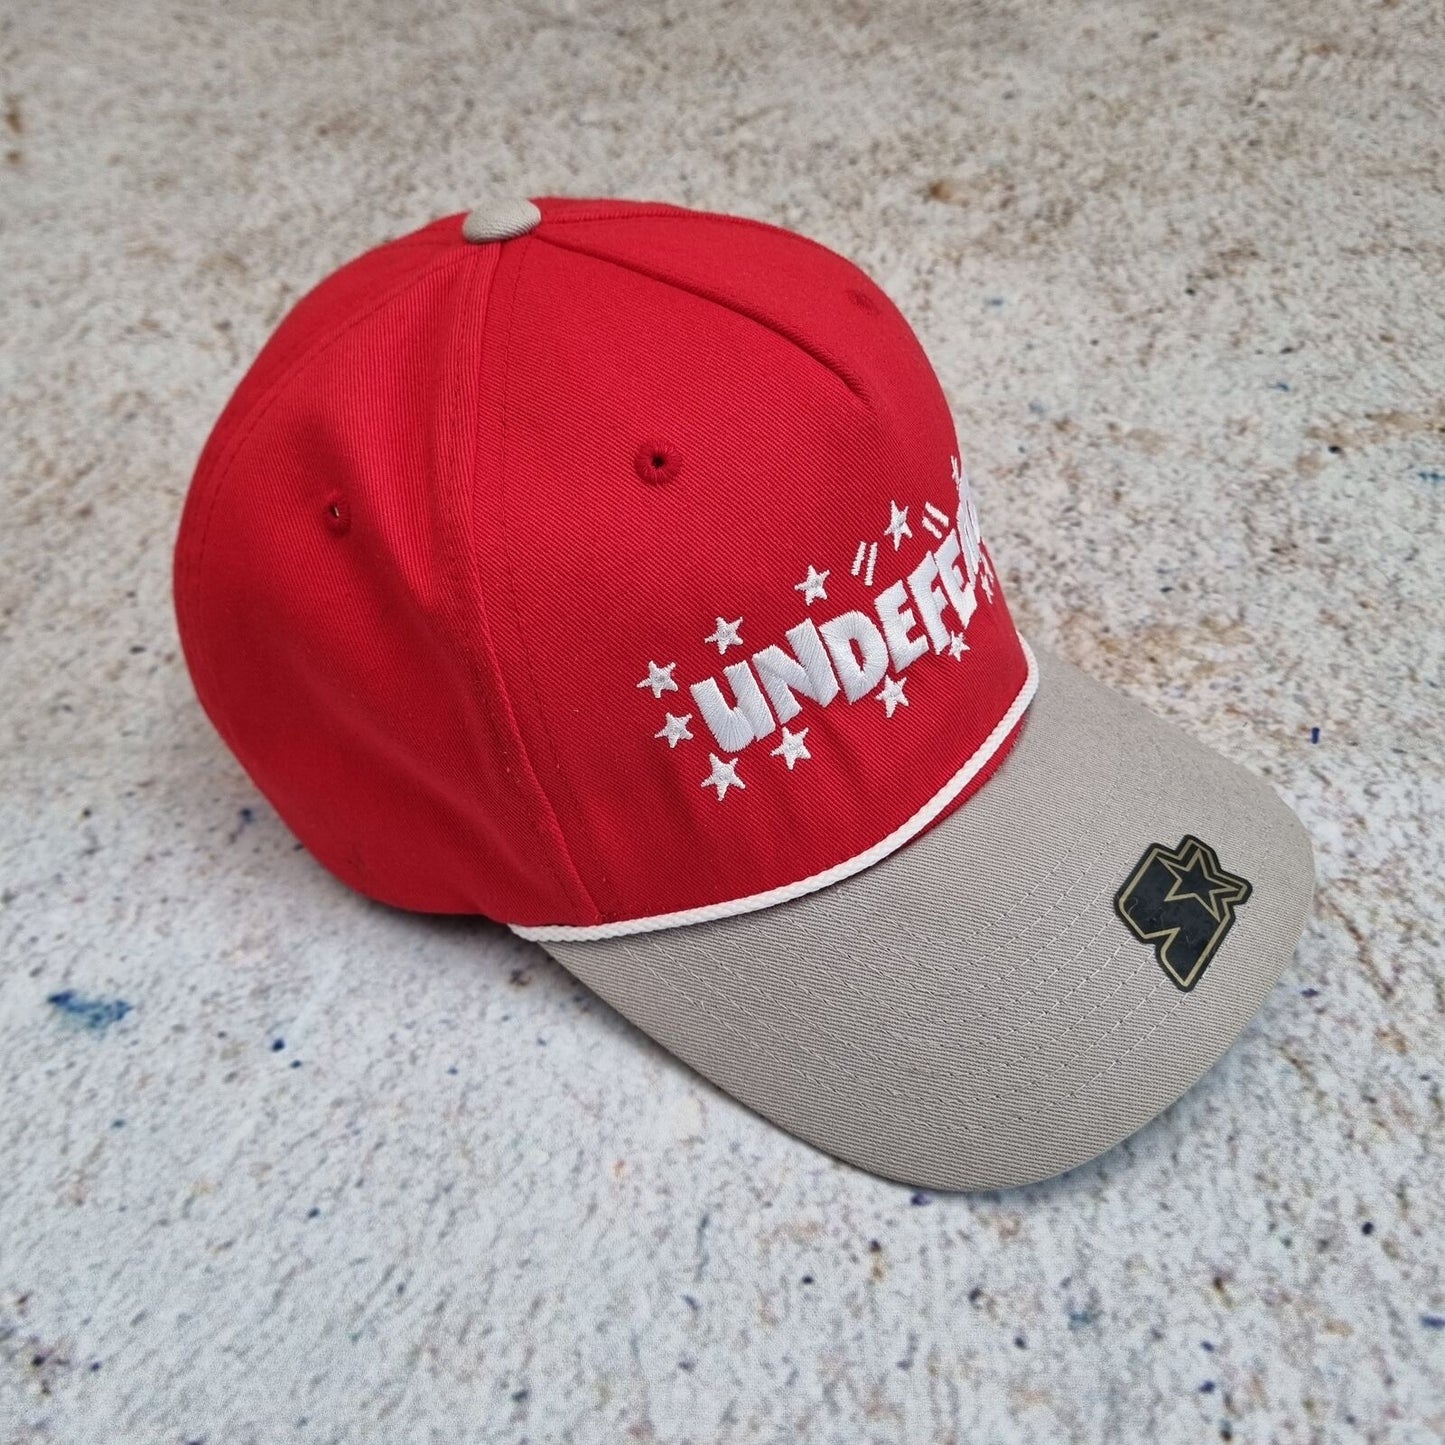 Starter UNDEFEATED CAP SNAPBACK VINTAGE - Red - Size ONE SIZE